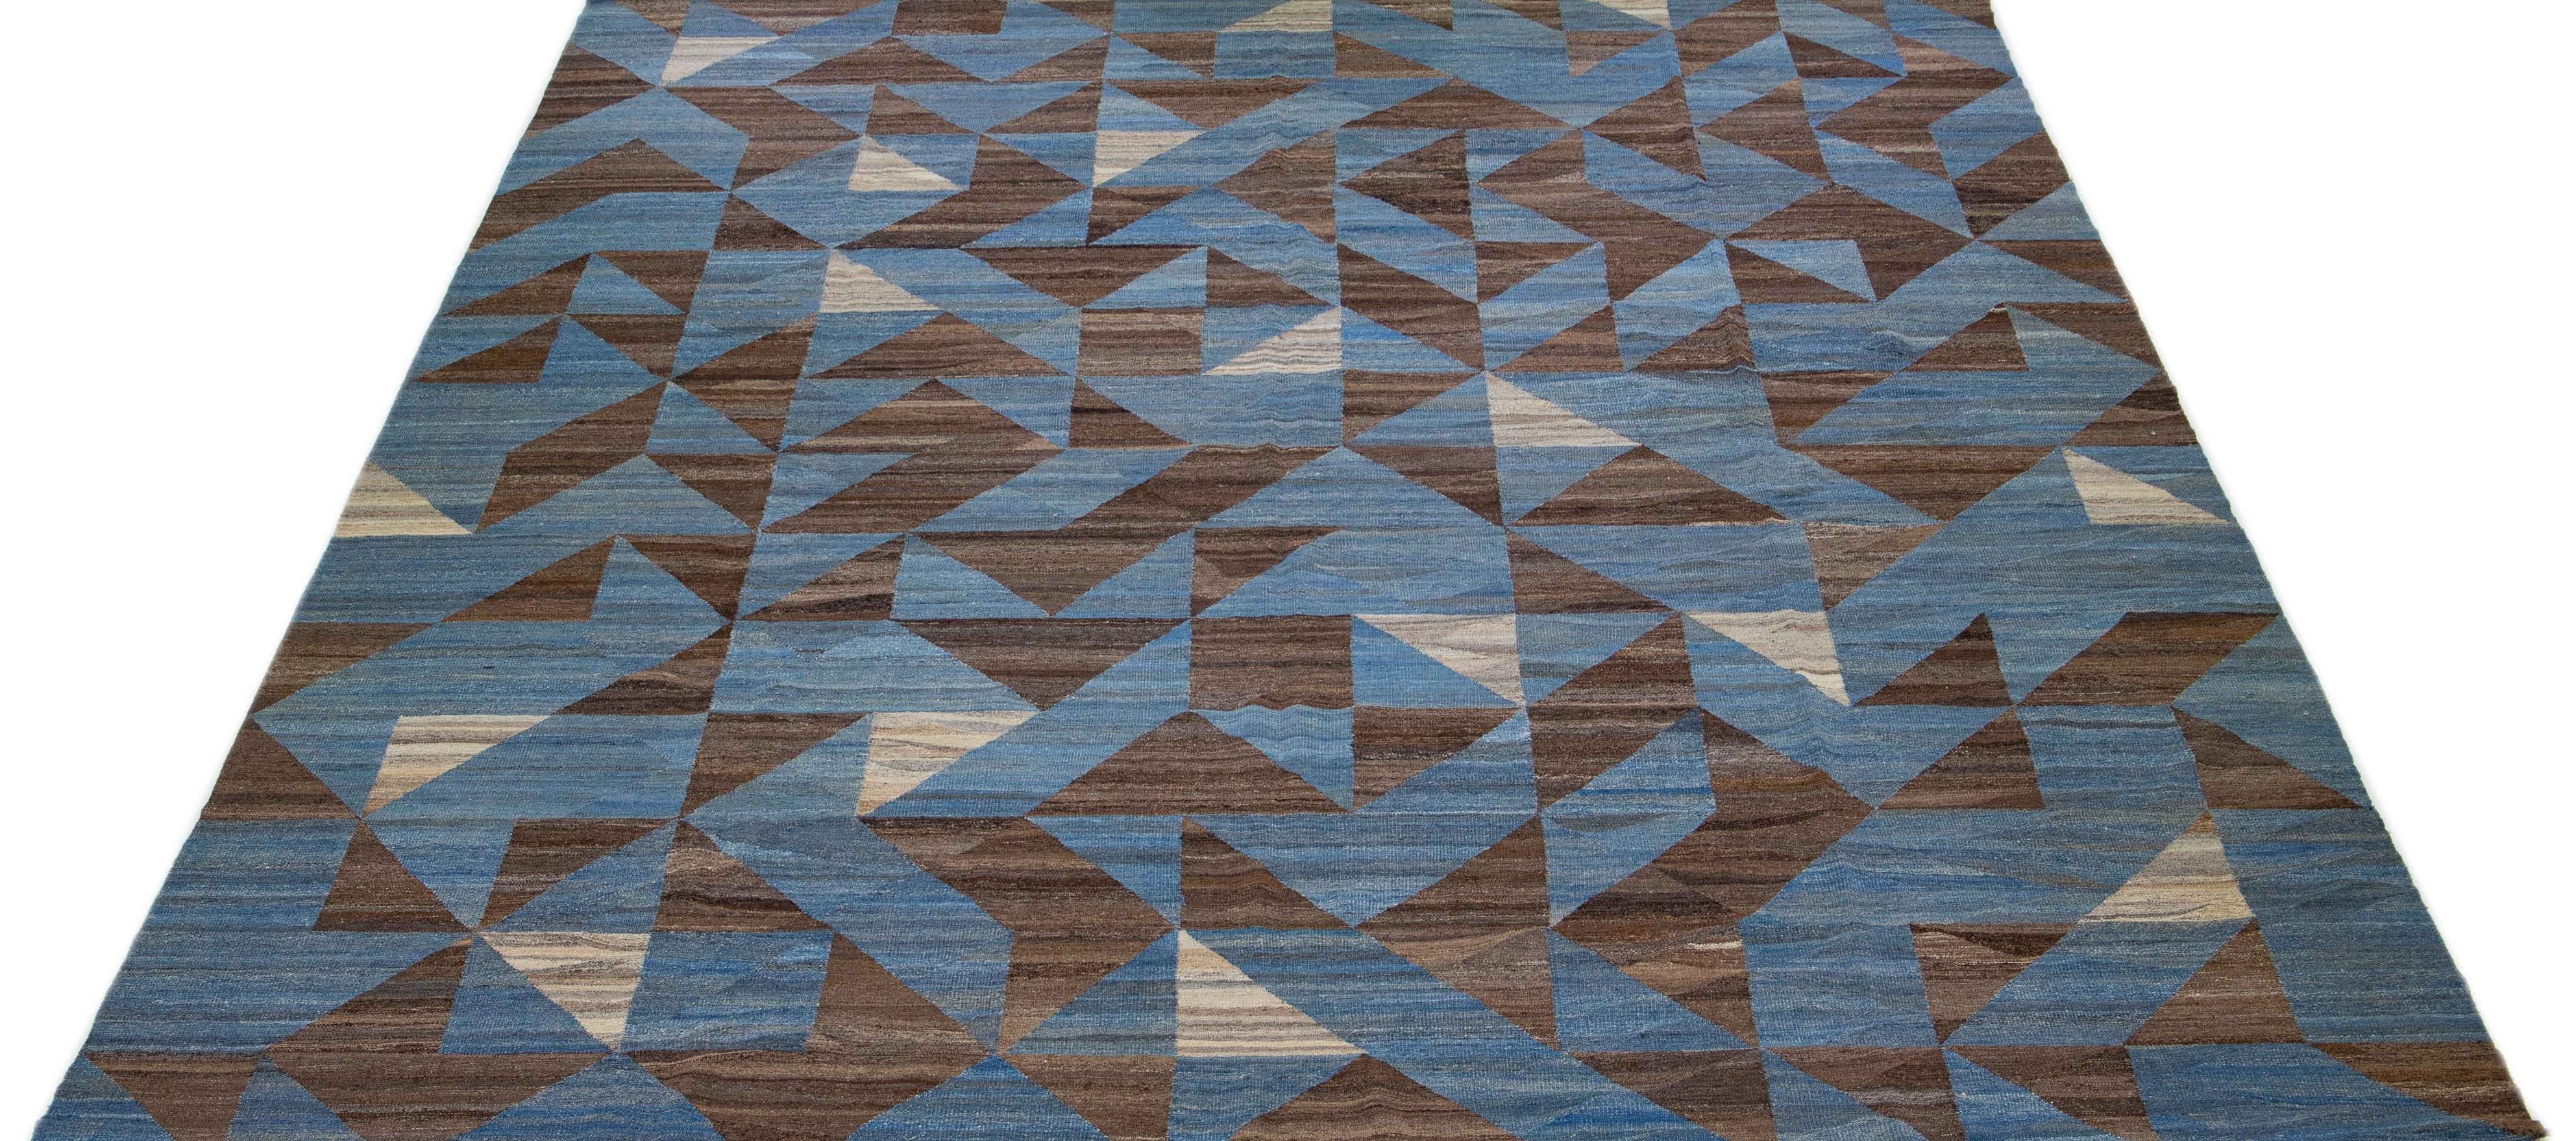 Contemporary Blue Oversize Kilim Wool Rug Flatweave with a Modern Abstract Design For Sale